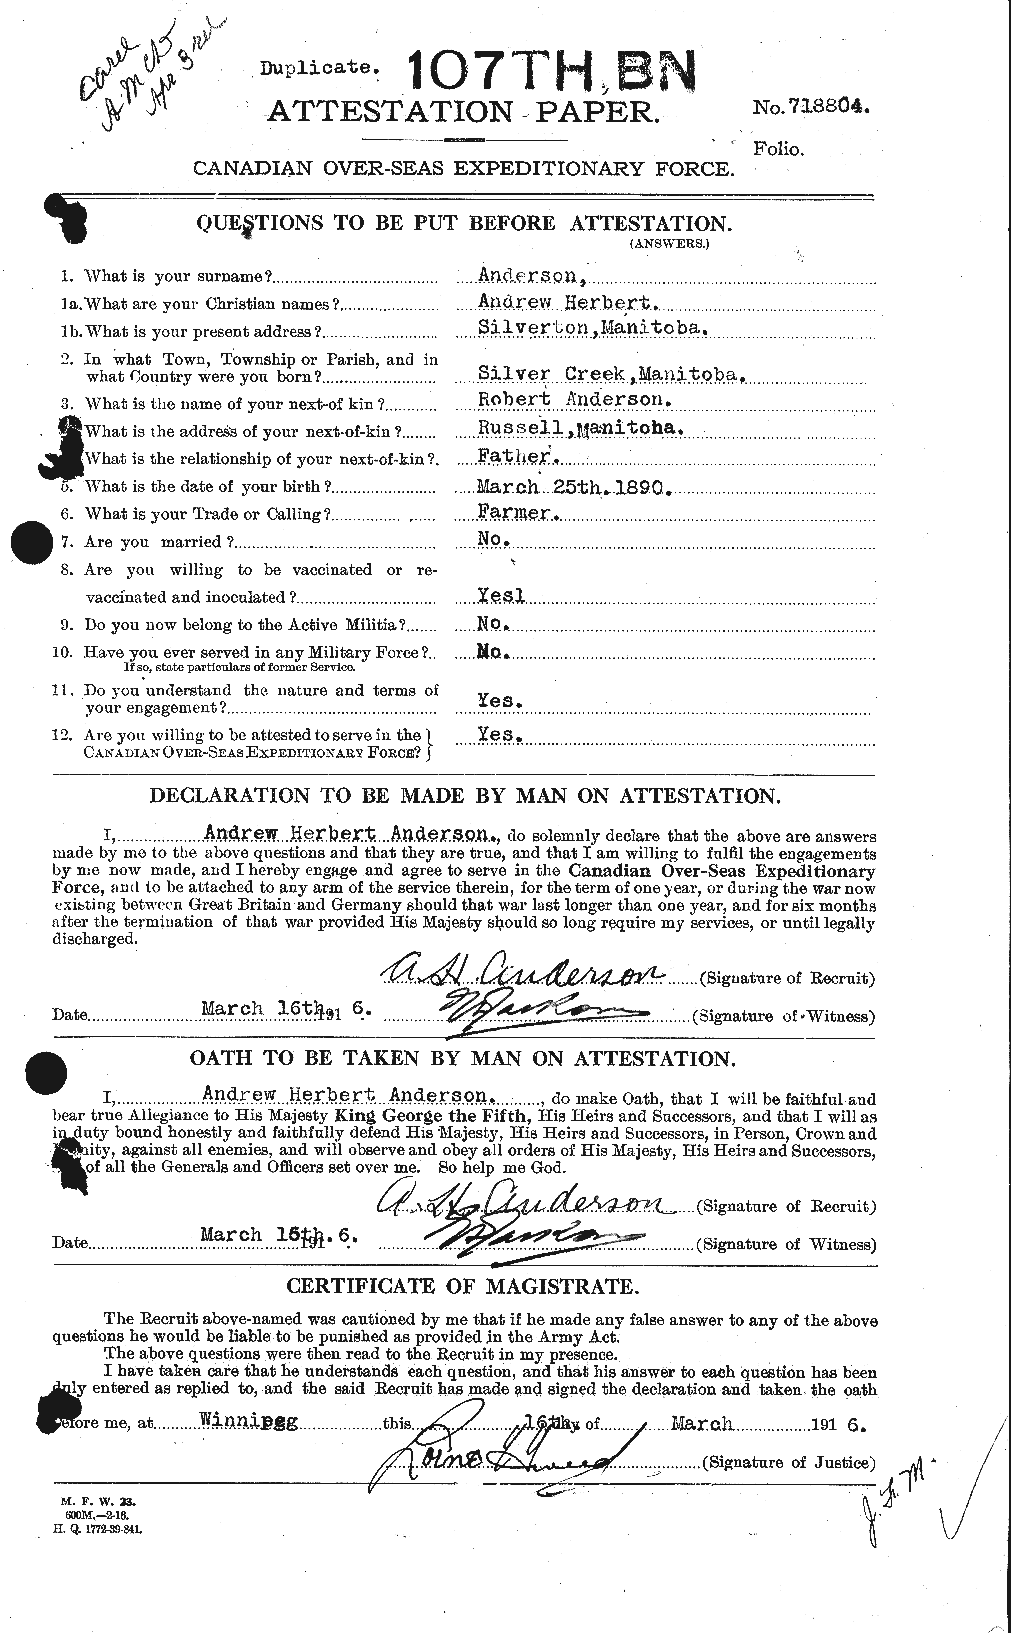 Personnel Records of the First World War - CEF 209403a